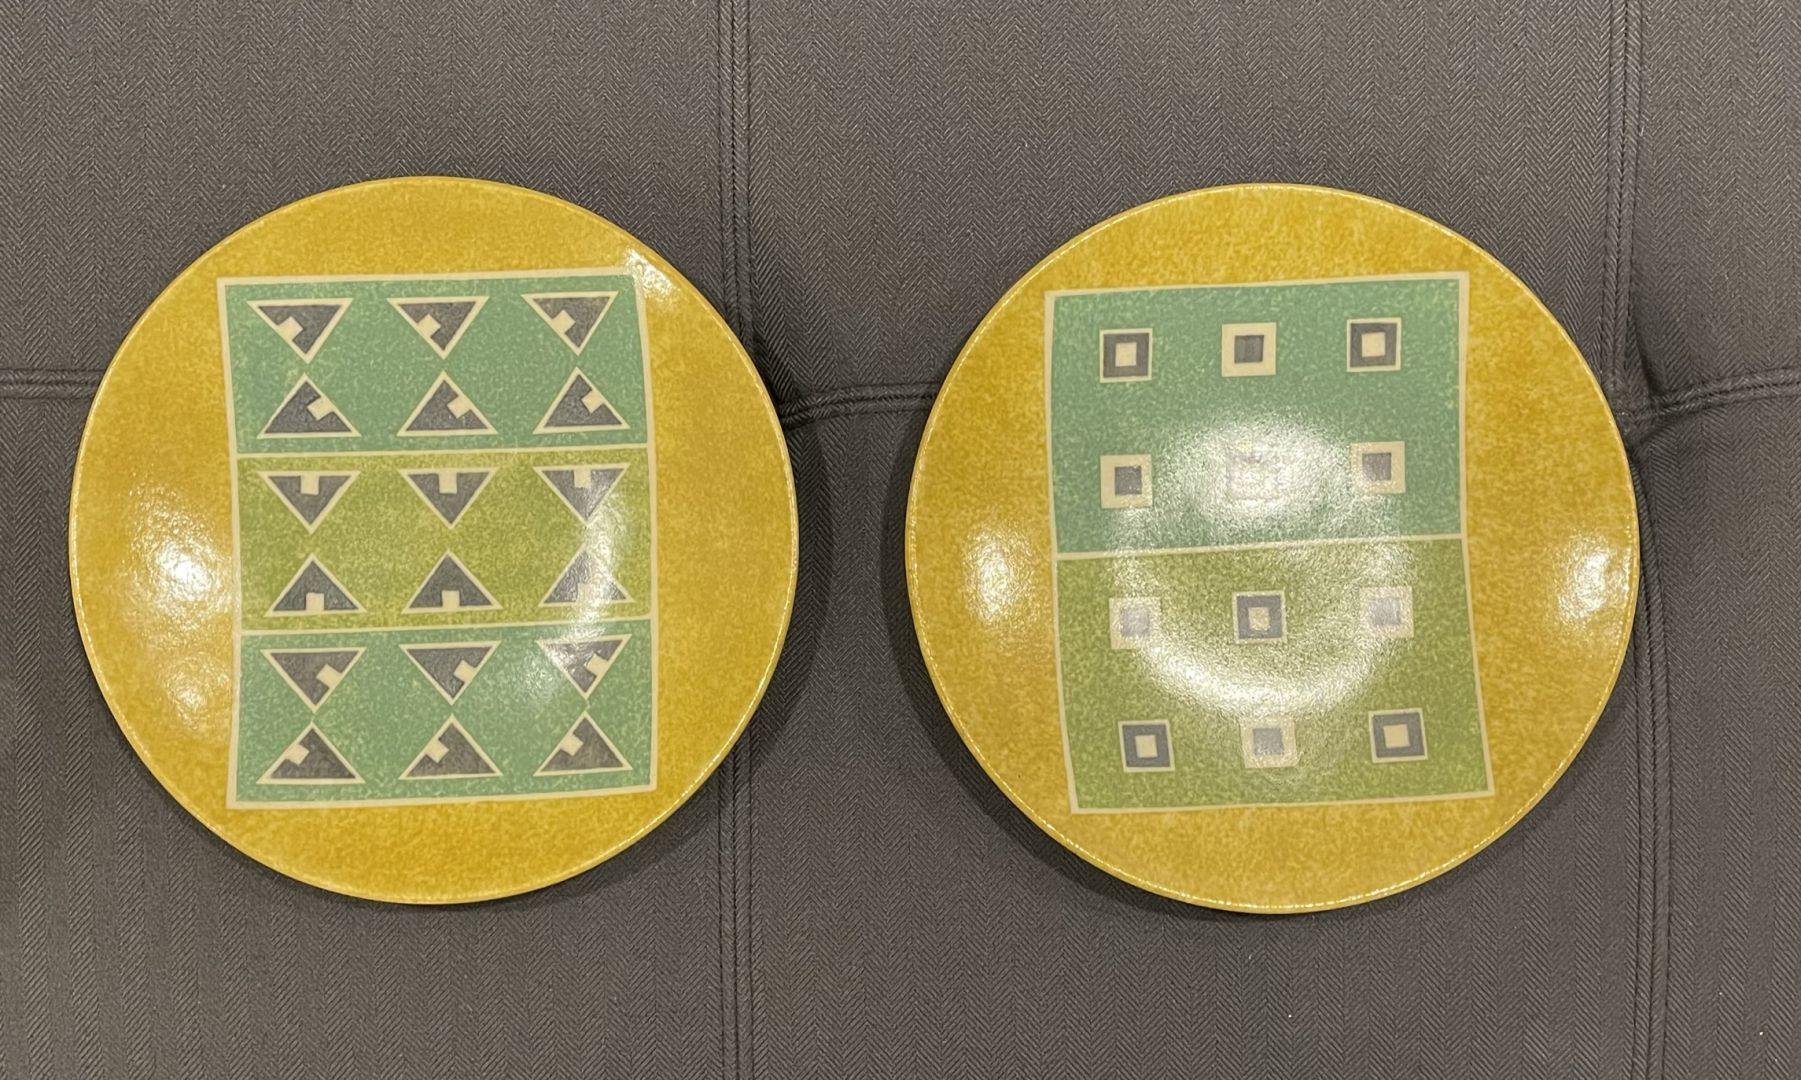 PAIR OF YELLOW PLATES WITH GEOMETRIC DESIGNS